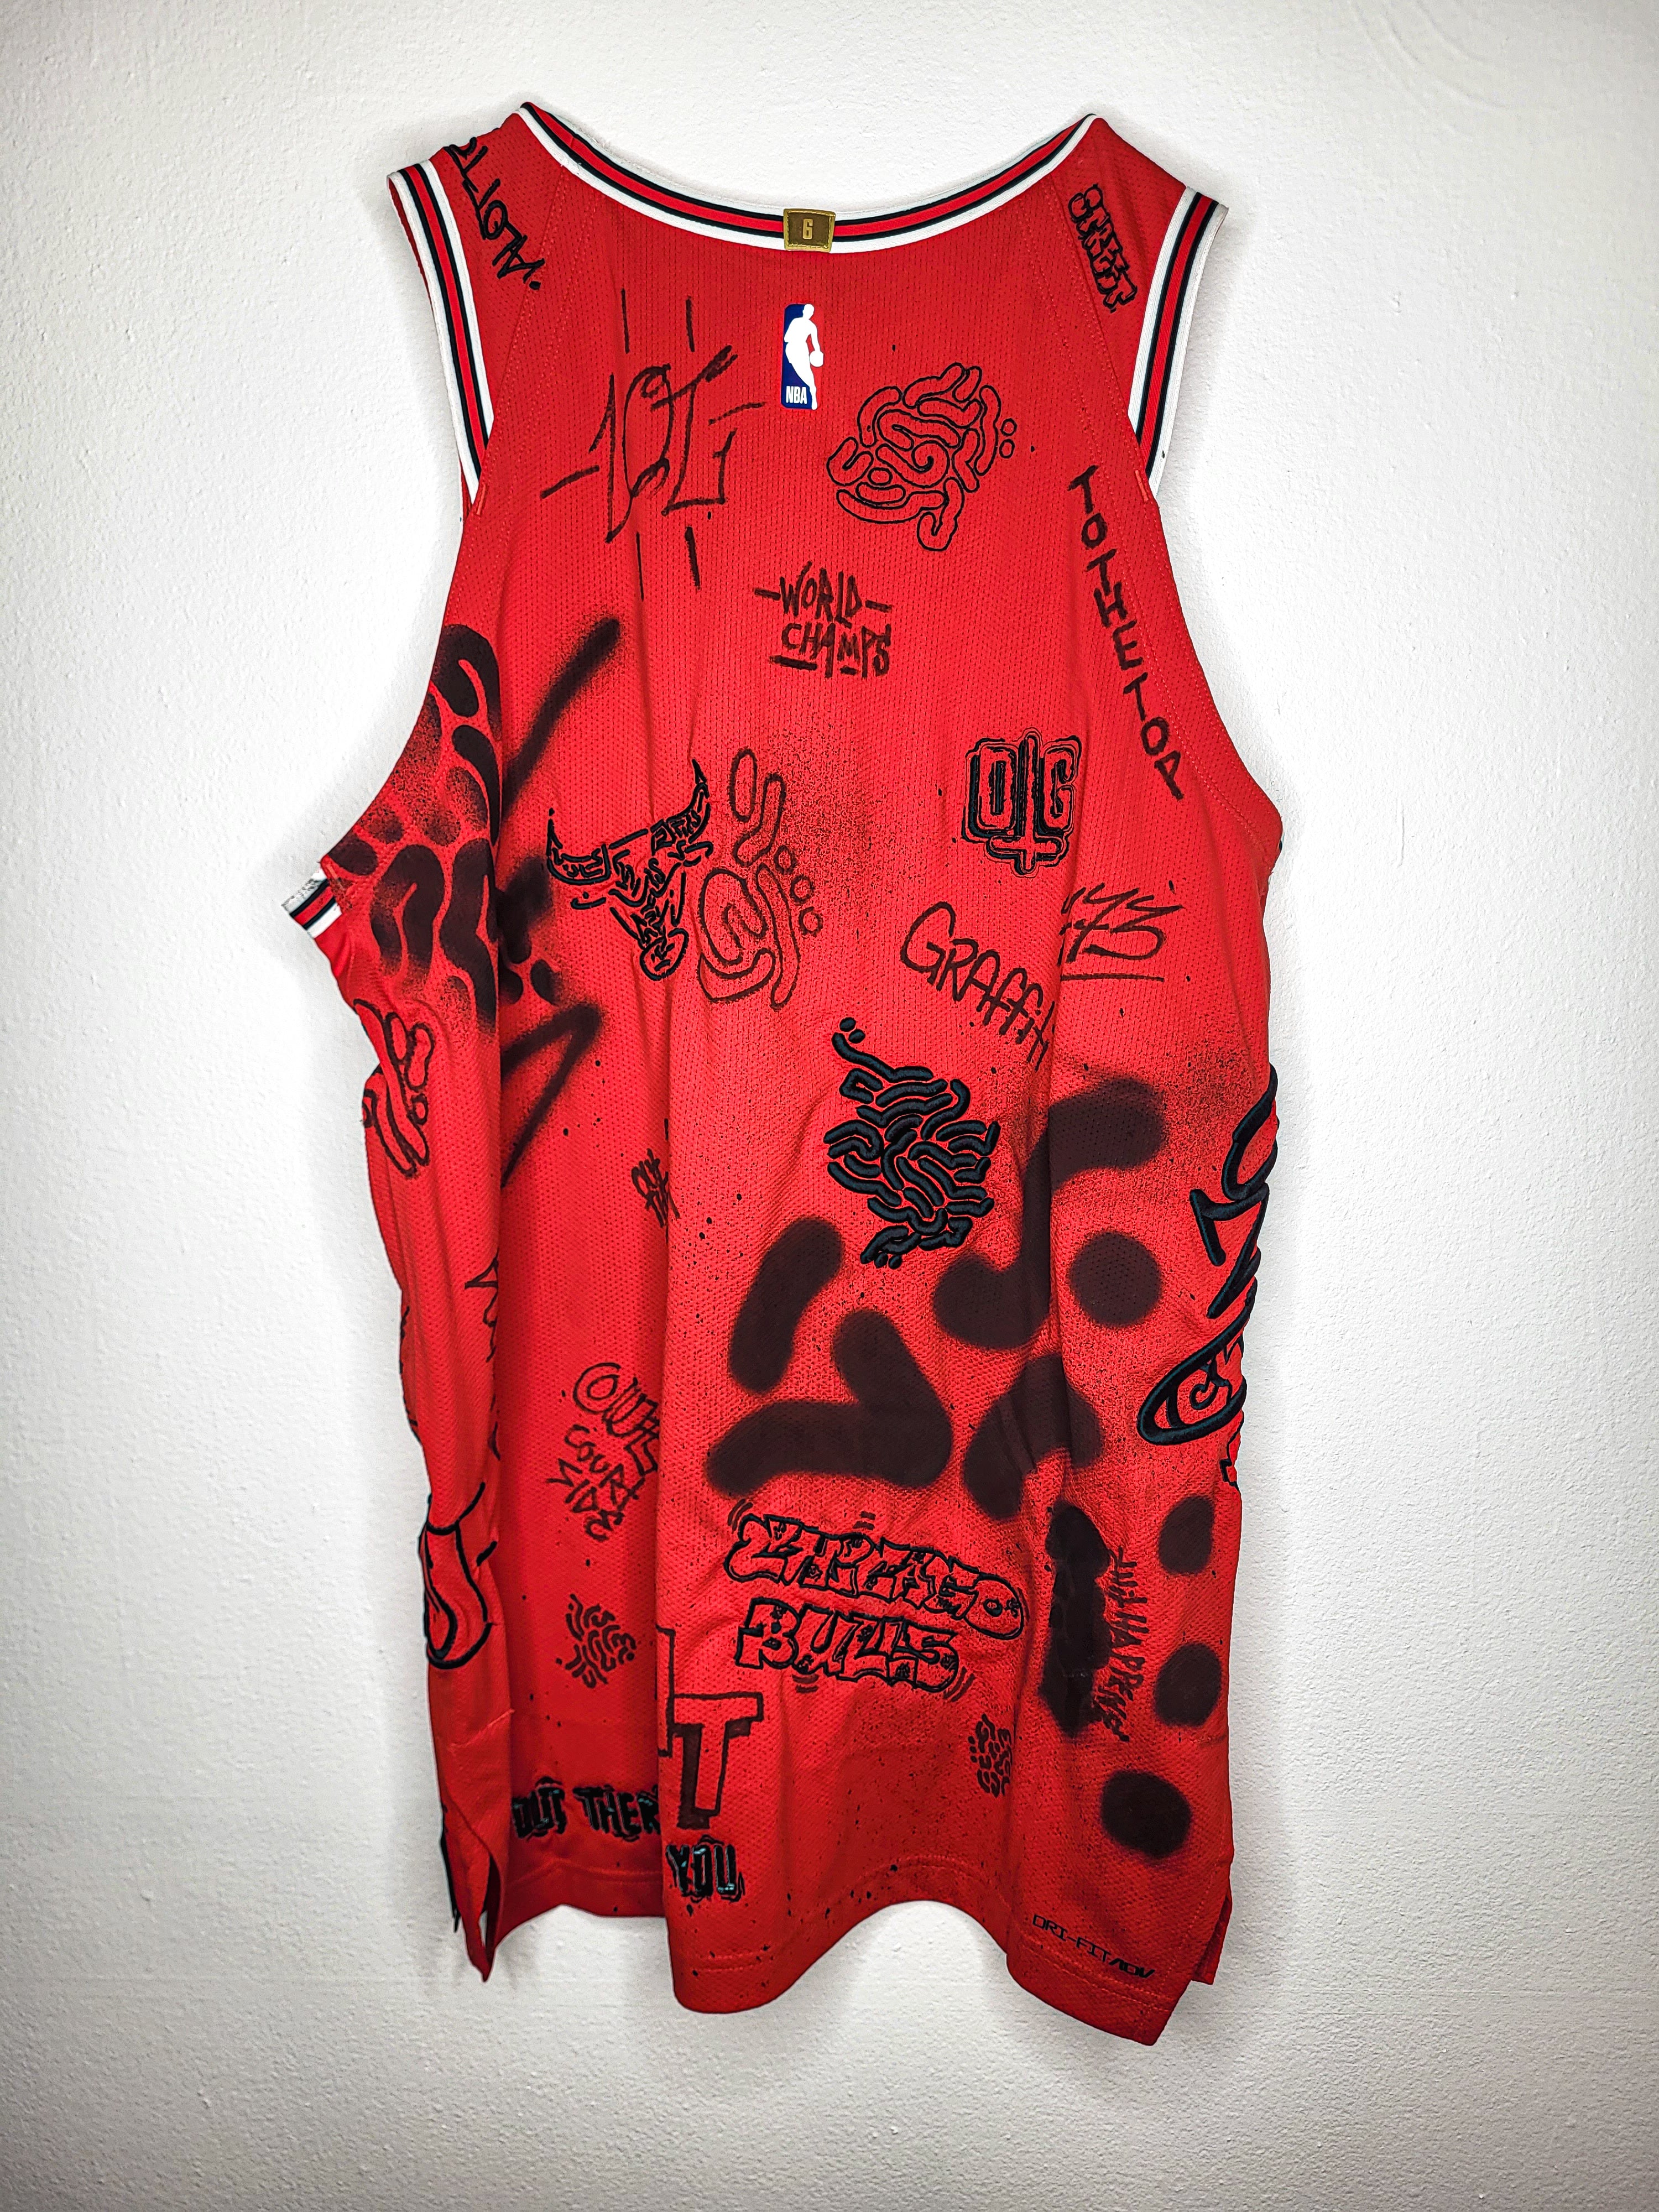 "Chicago Sketchbook" Jersey by Lefty Out There